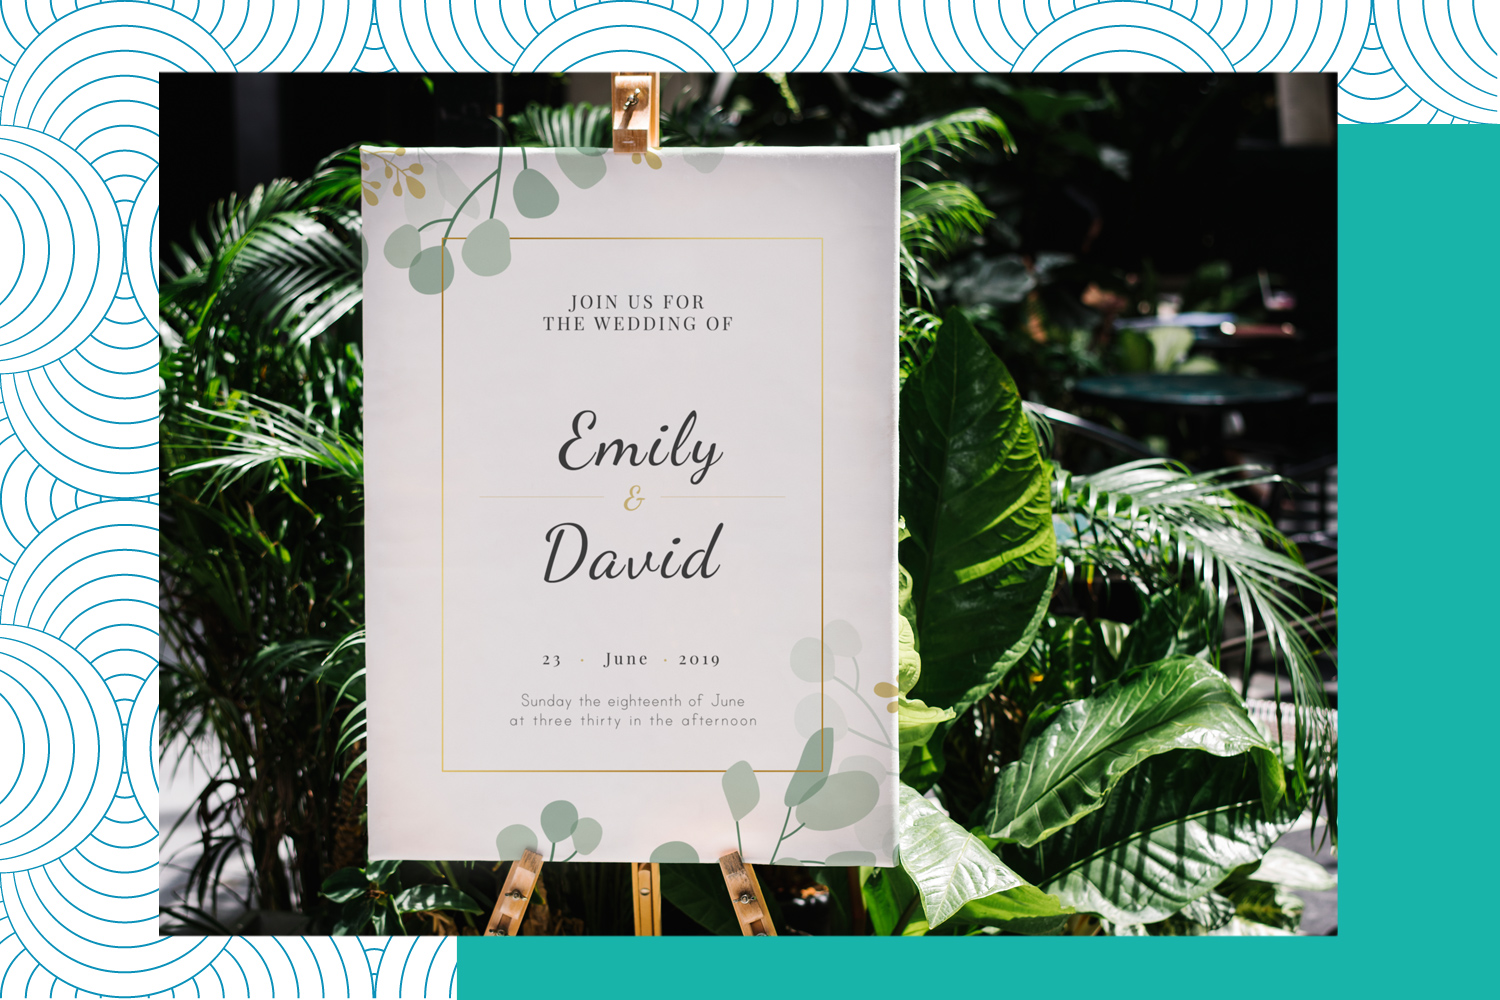 Open Seating Wedding Sign // Ceremony Seating Entrance Display